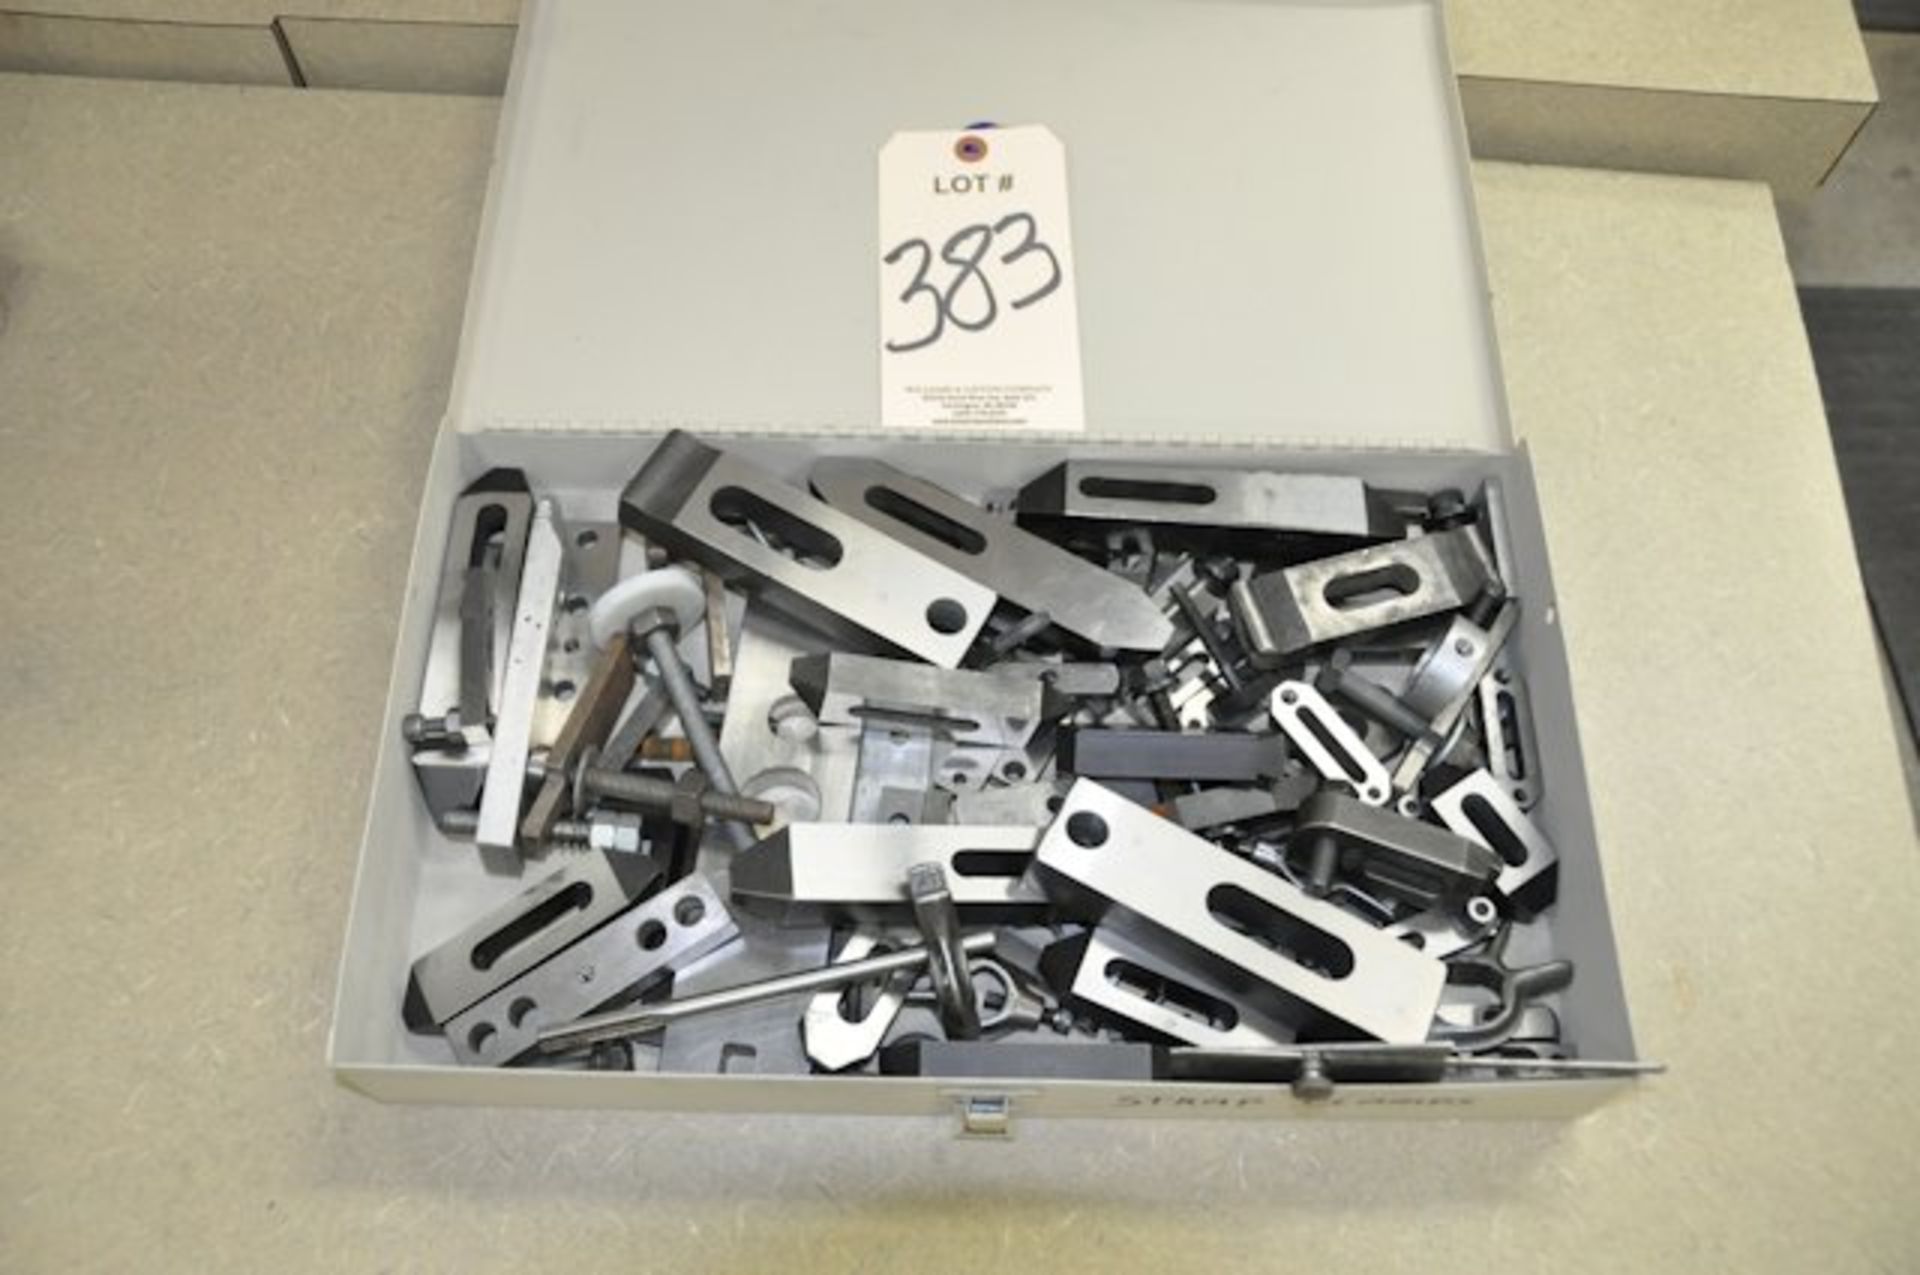 Lot-Assorted Strap Clamps; etc. in (1) Tray Box